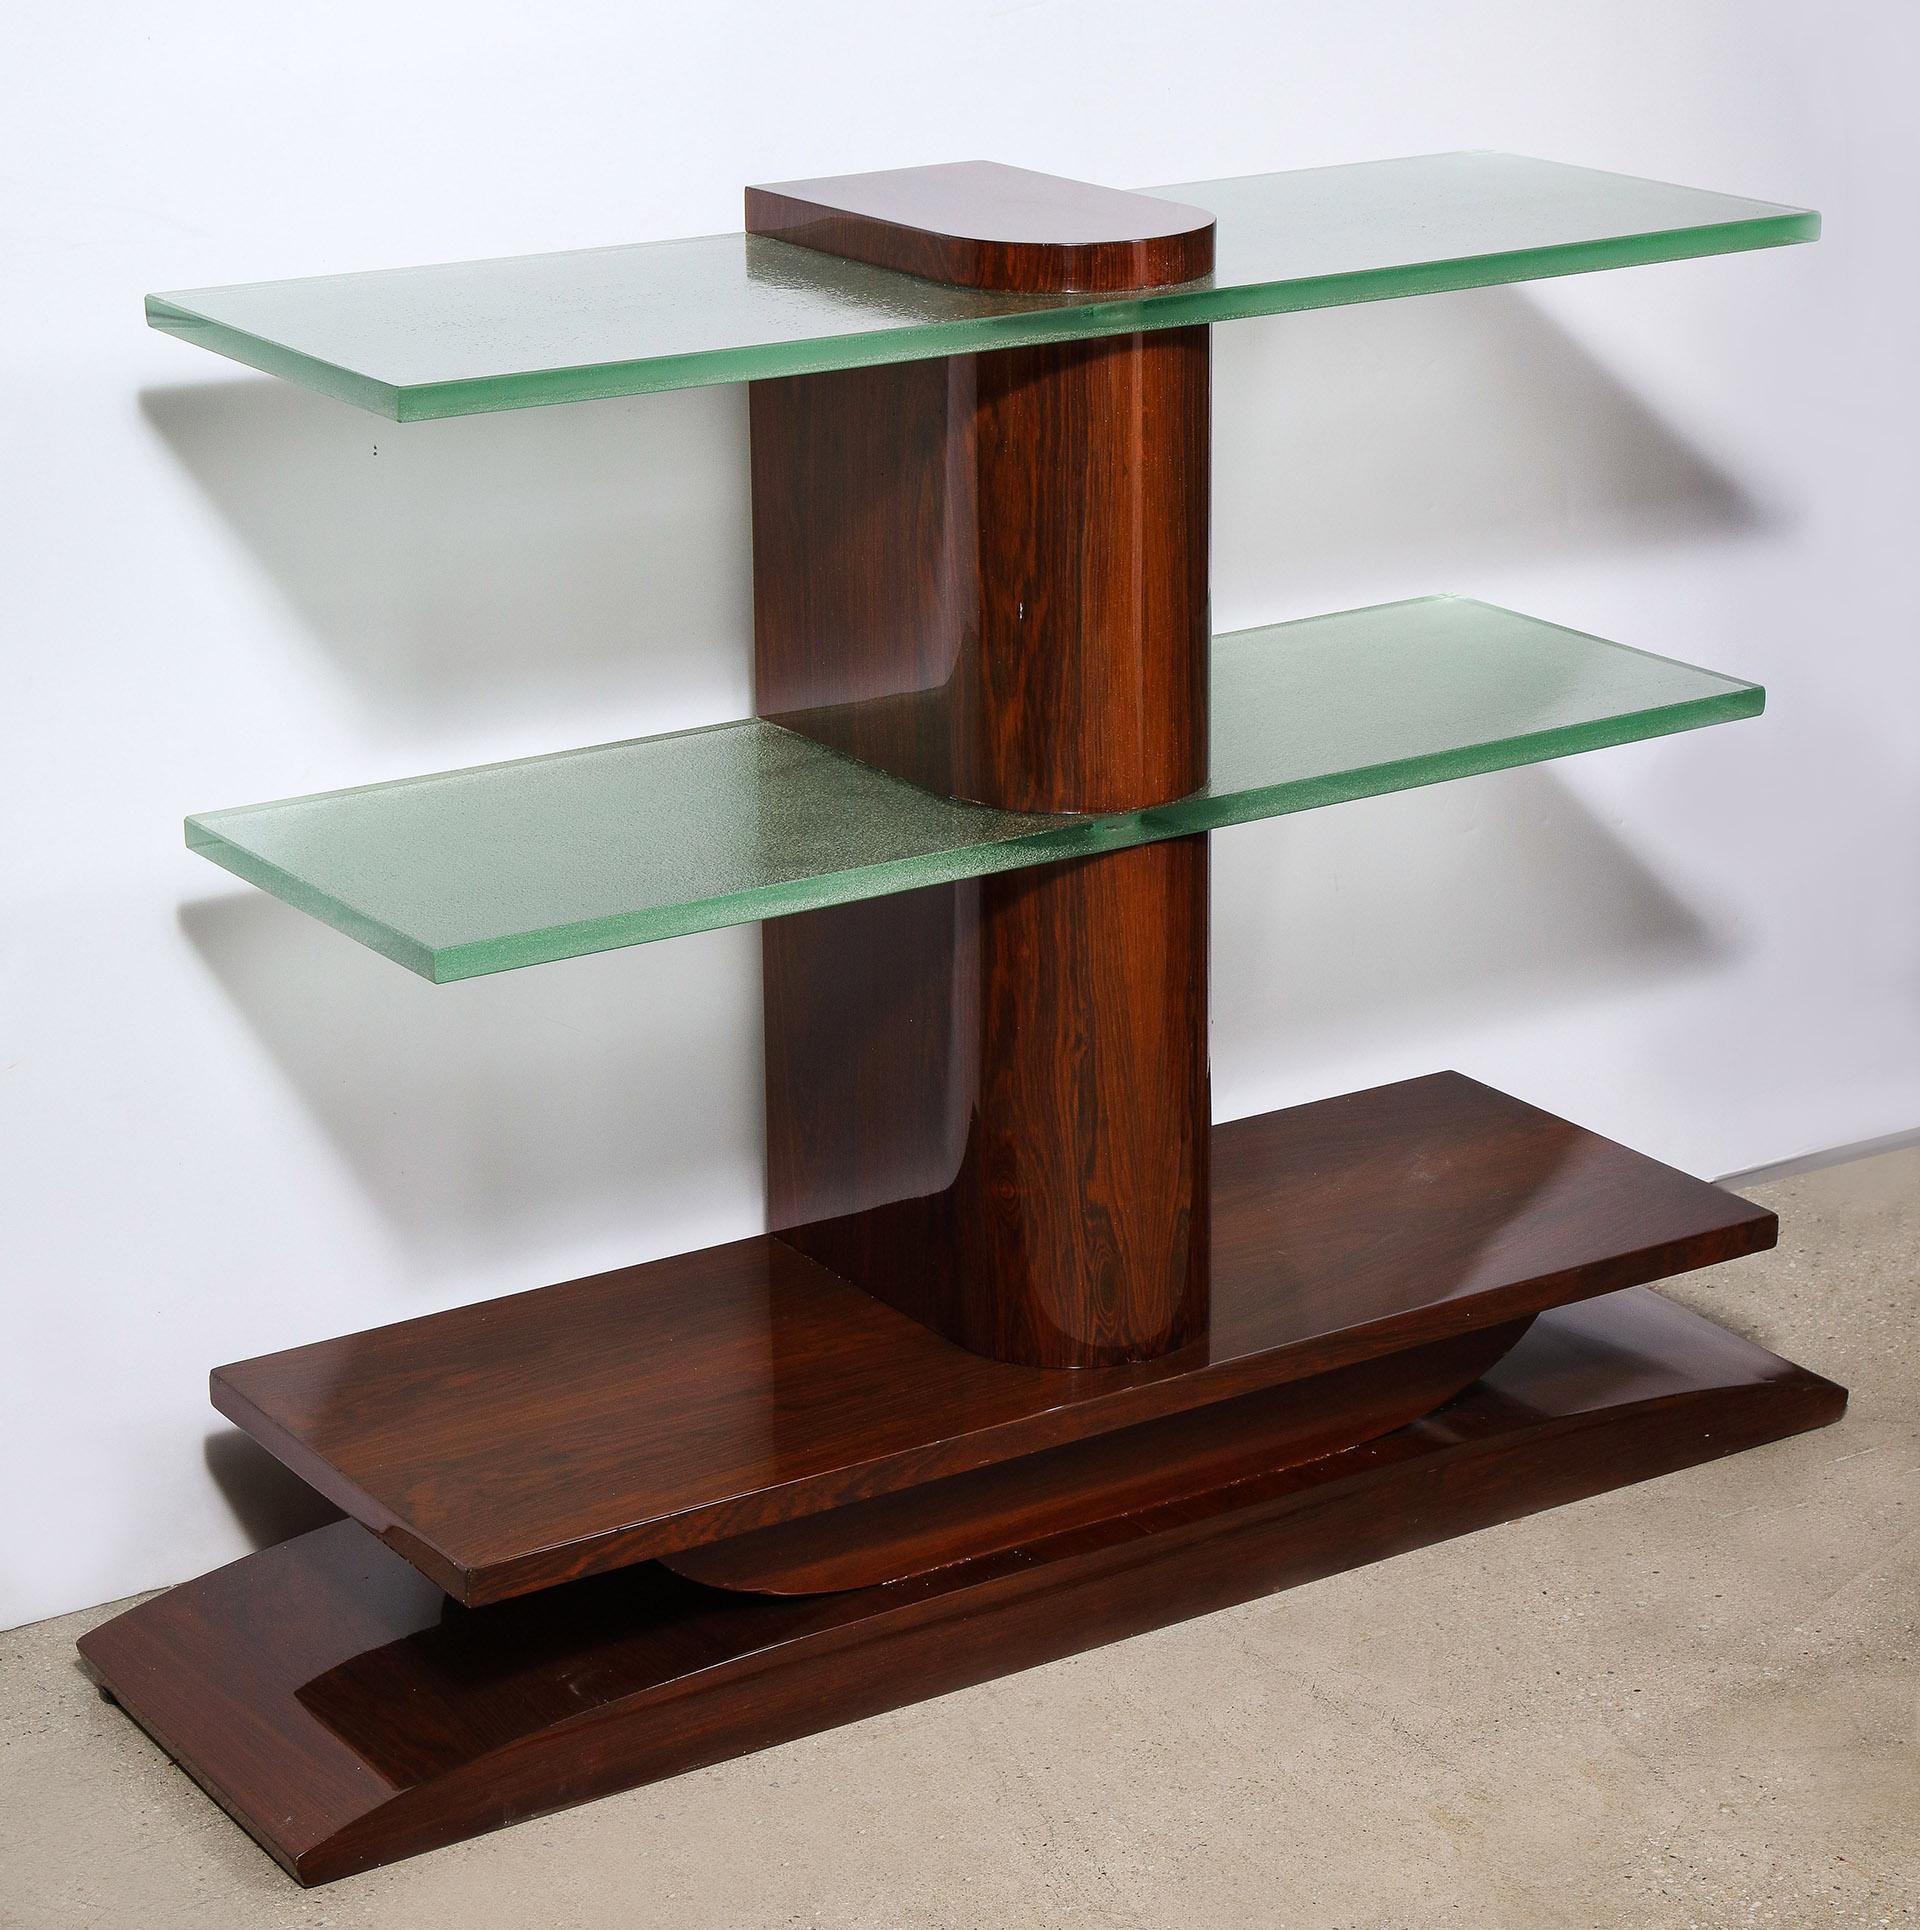 The Palisander veneered console with two Gobain glass shelves supported by a central column on a stepped base.